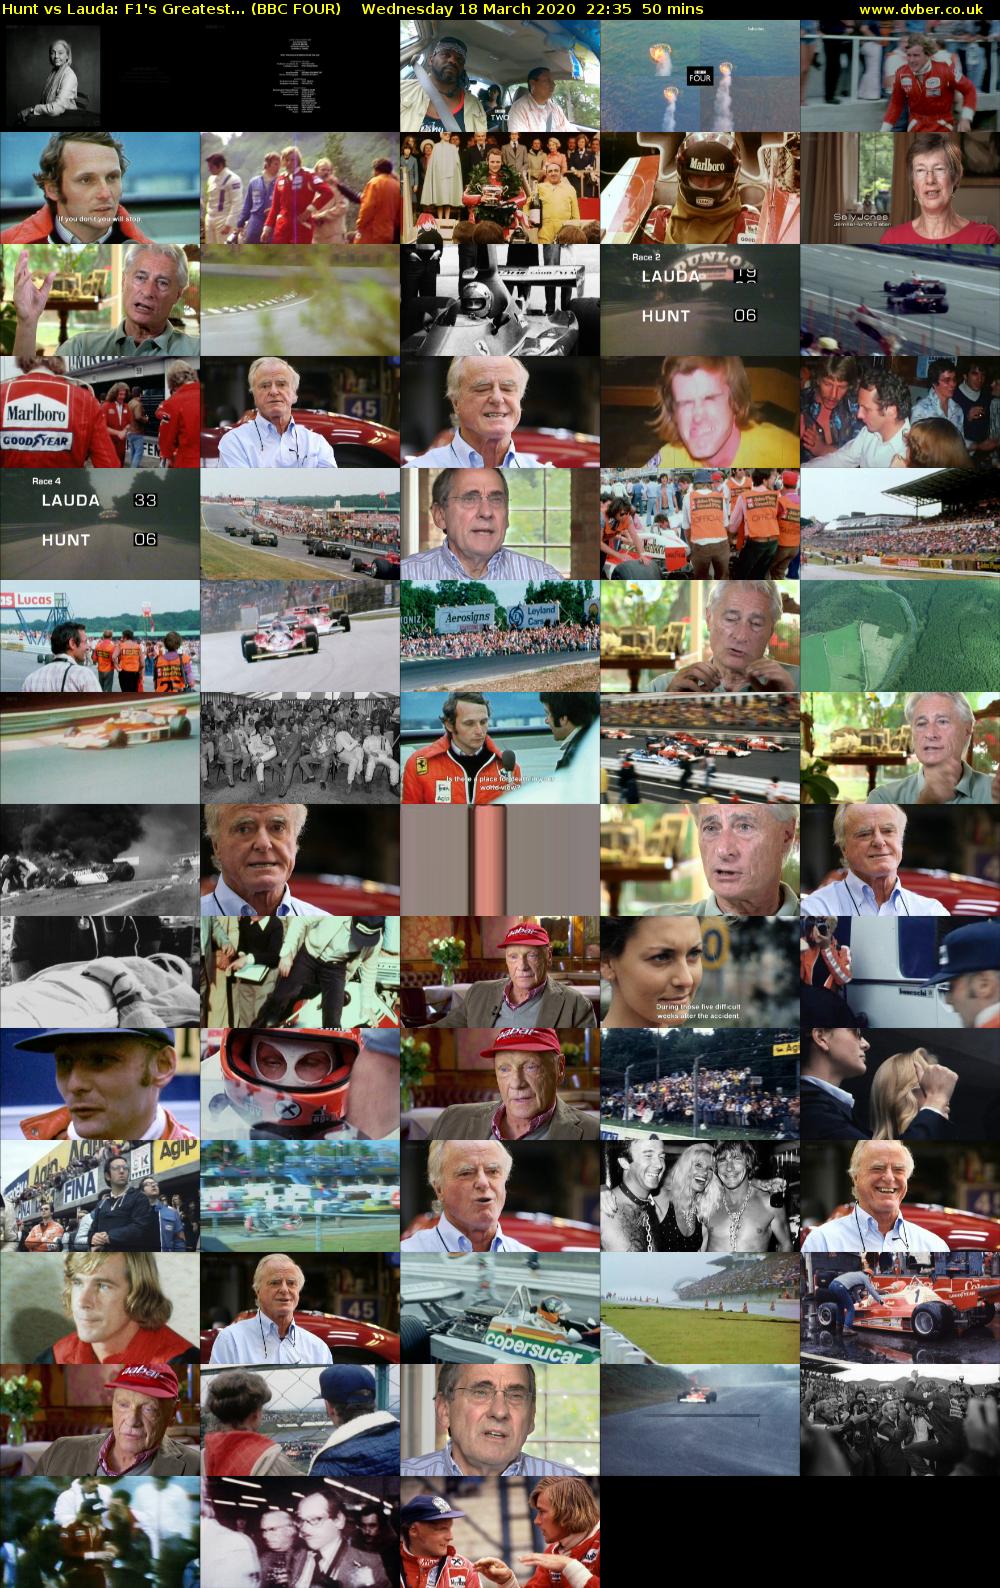 Hunt vs Lauda: F1's Greatest... (BBC FOUR) Wednesday 18 March 2020 22:35 - 23:25